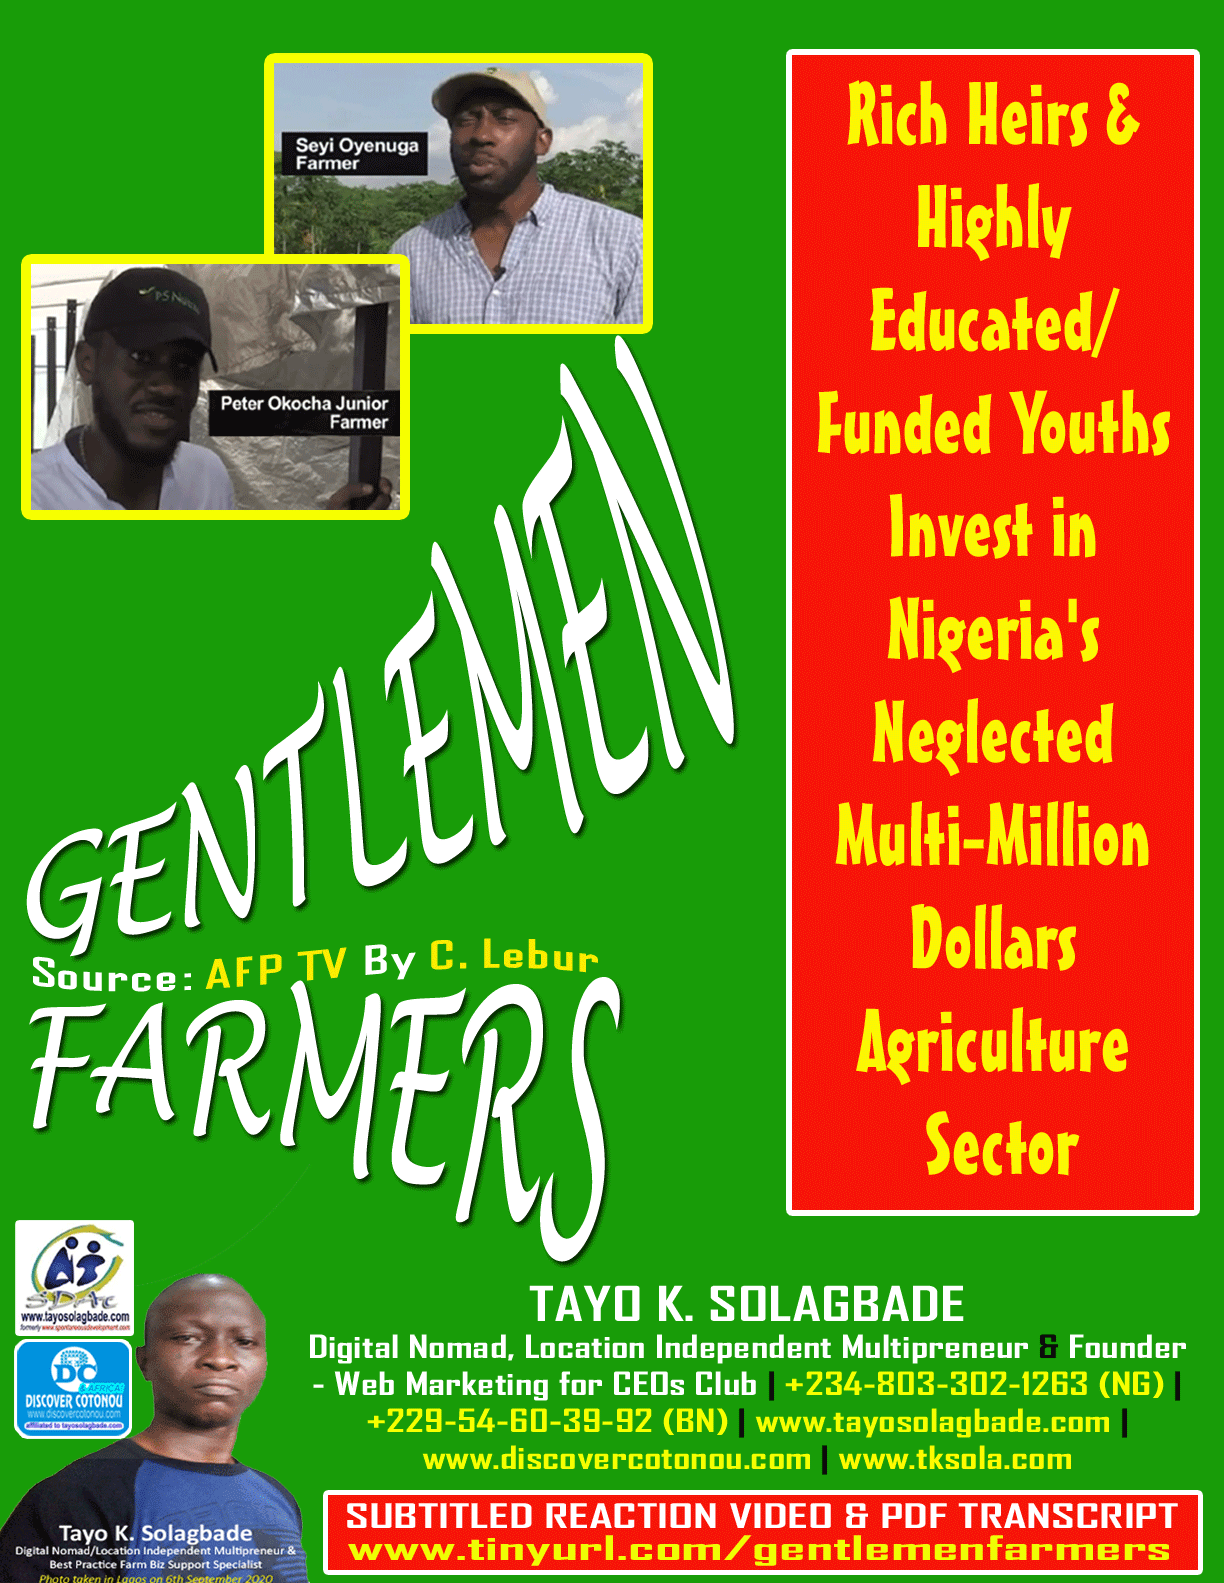 TO GET THIS PDF TRANSCRIPT - Email your Name and Whatsapp Number to gentlemenfarmers@tksola.com with “Gentleman Farmers